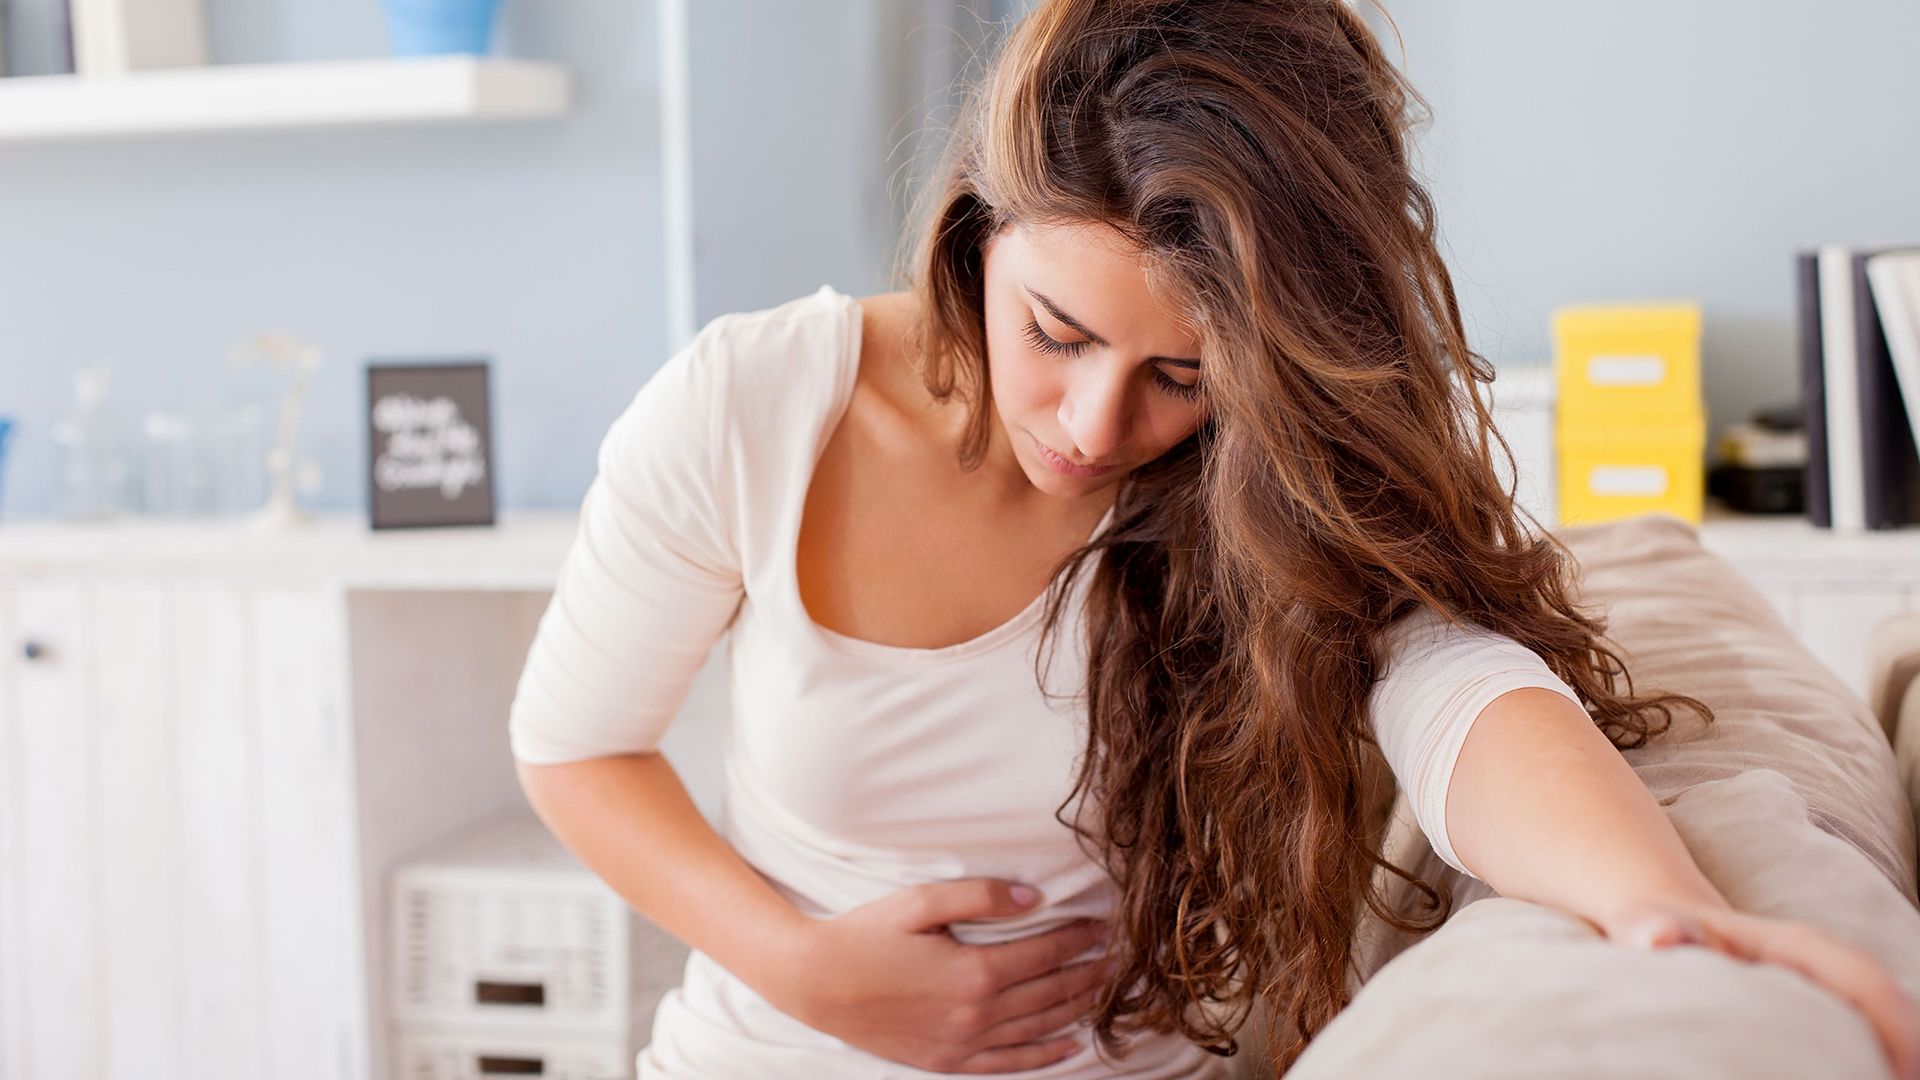 5 Surprisingly Painful and Heavy Truths About Endometriosis